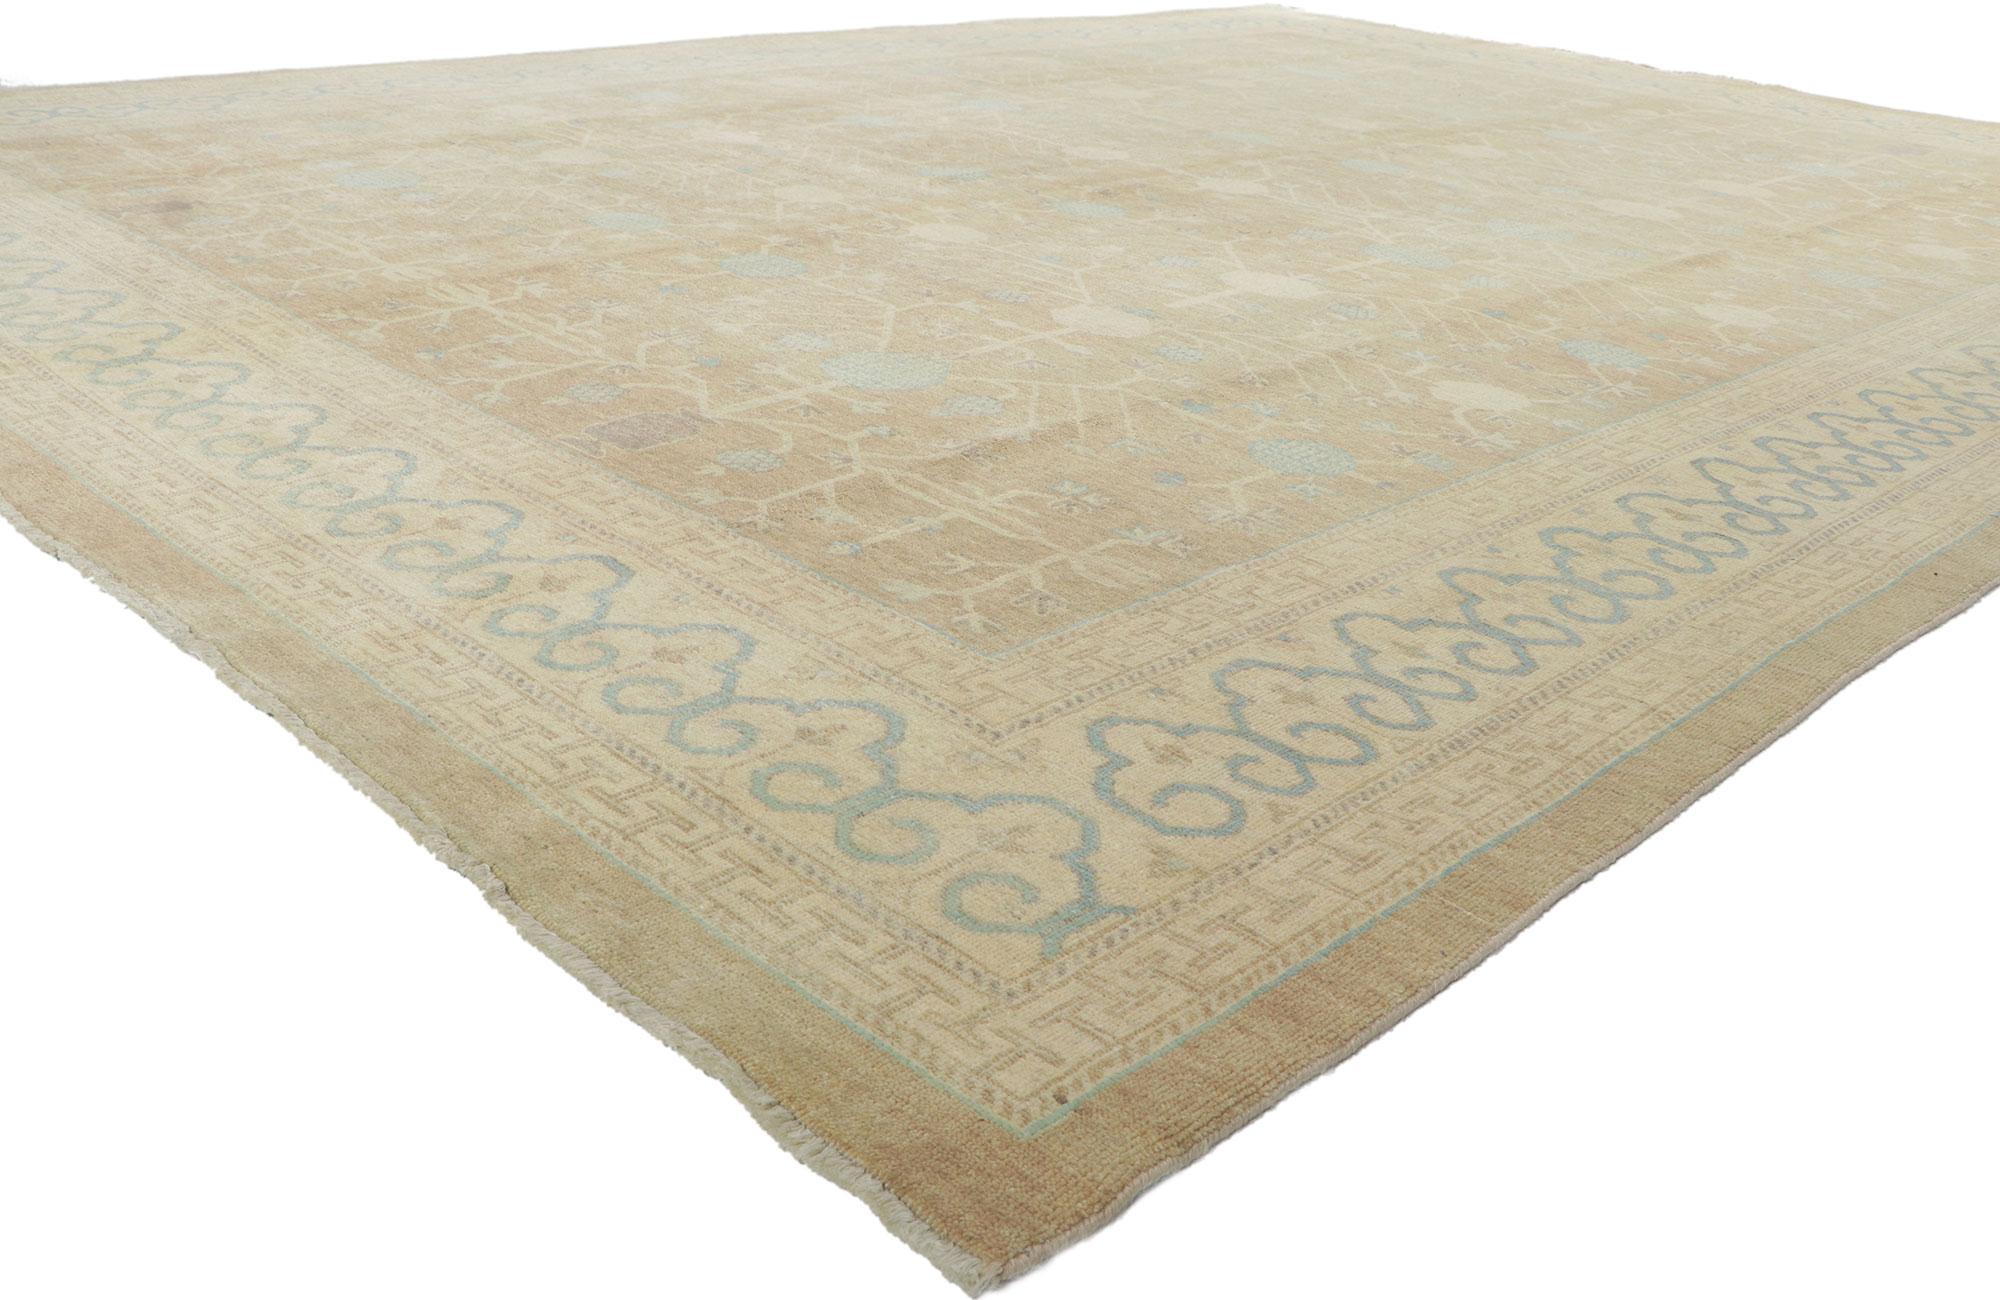 New Transitional Khotan Rug with Soft Earth-Tone Colors For Sale 1